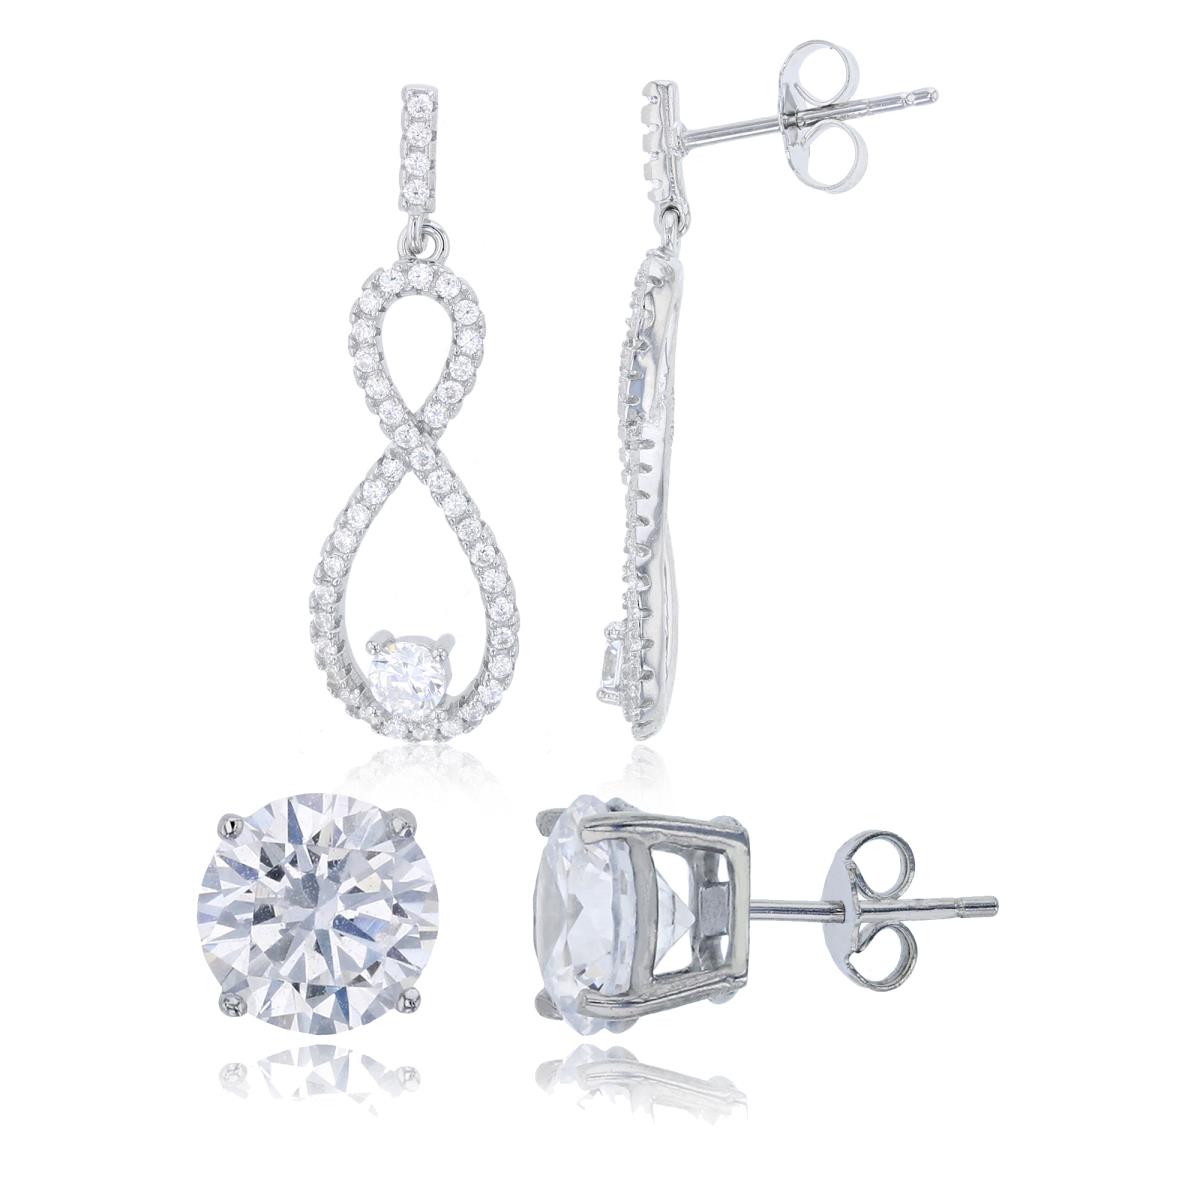 Sterling Silver Rhodium Pave Infinity Dangling Earring & 8mm Rd Solitaire Stud Earring Set